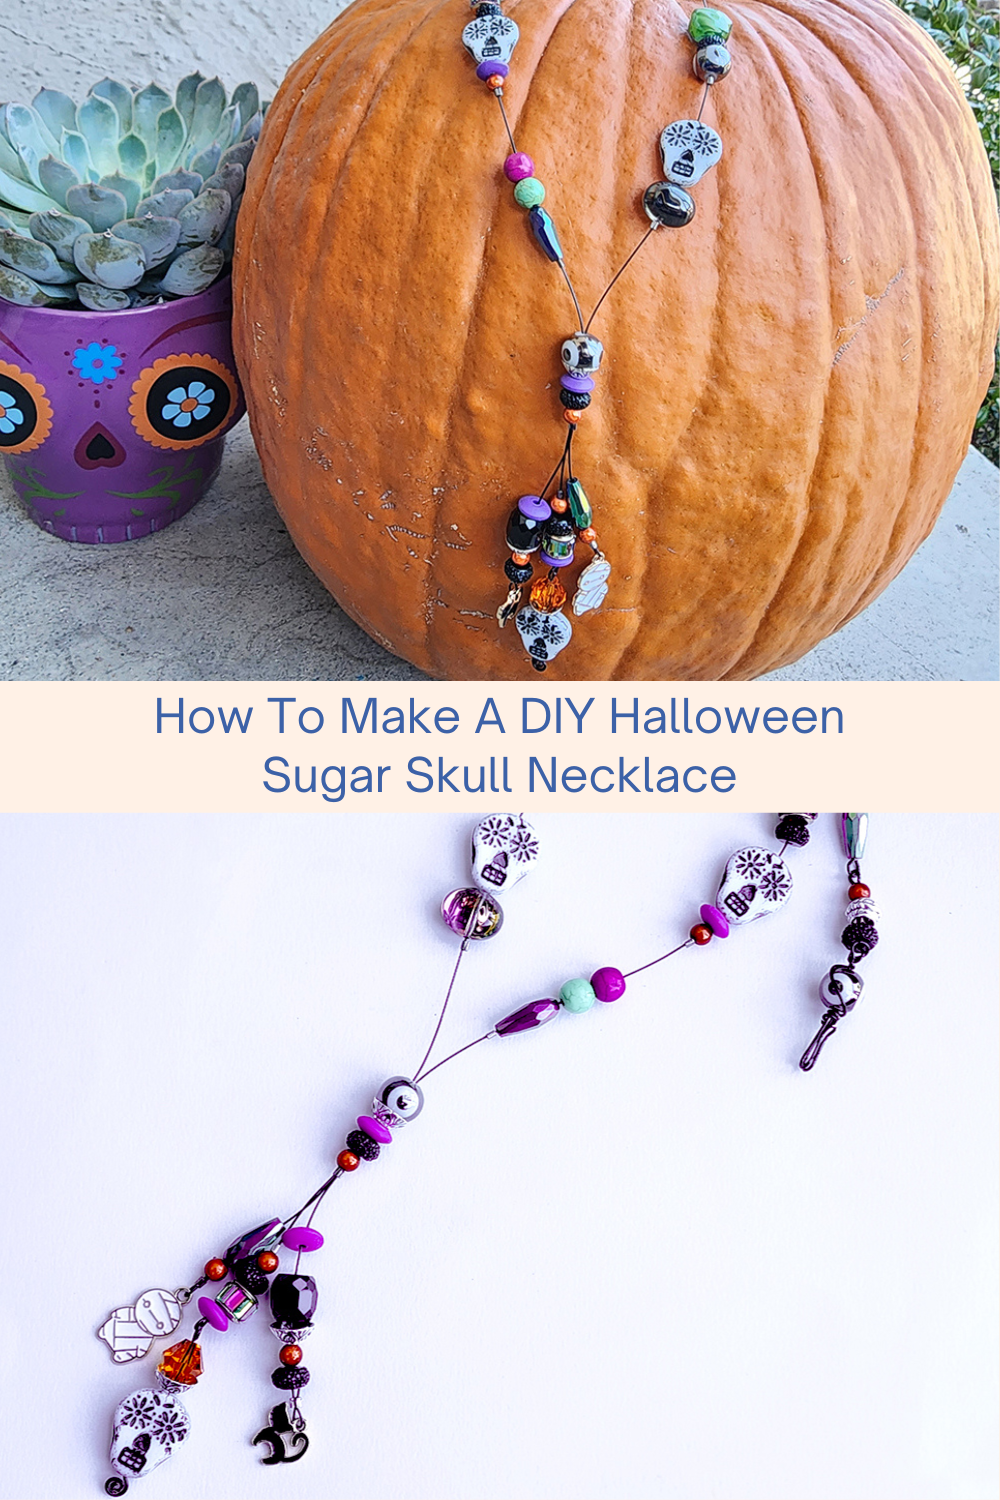 How To Make A DIY Halloween Sugar Skull Necklace Collage